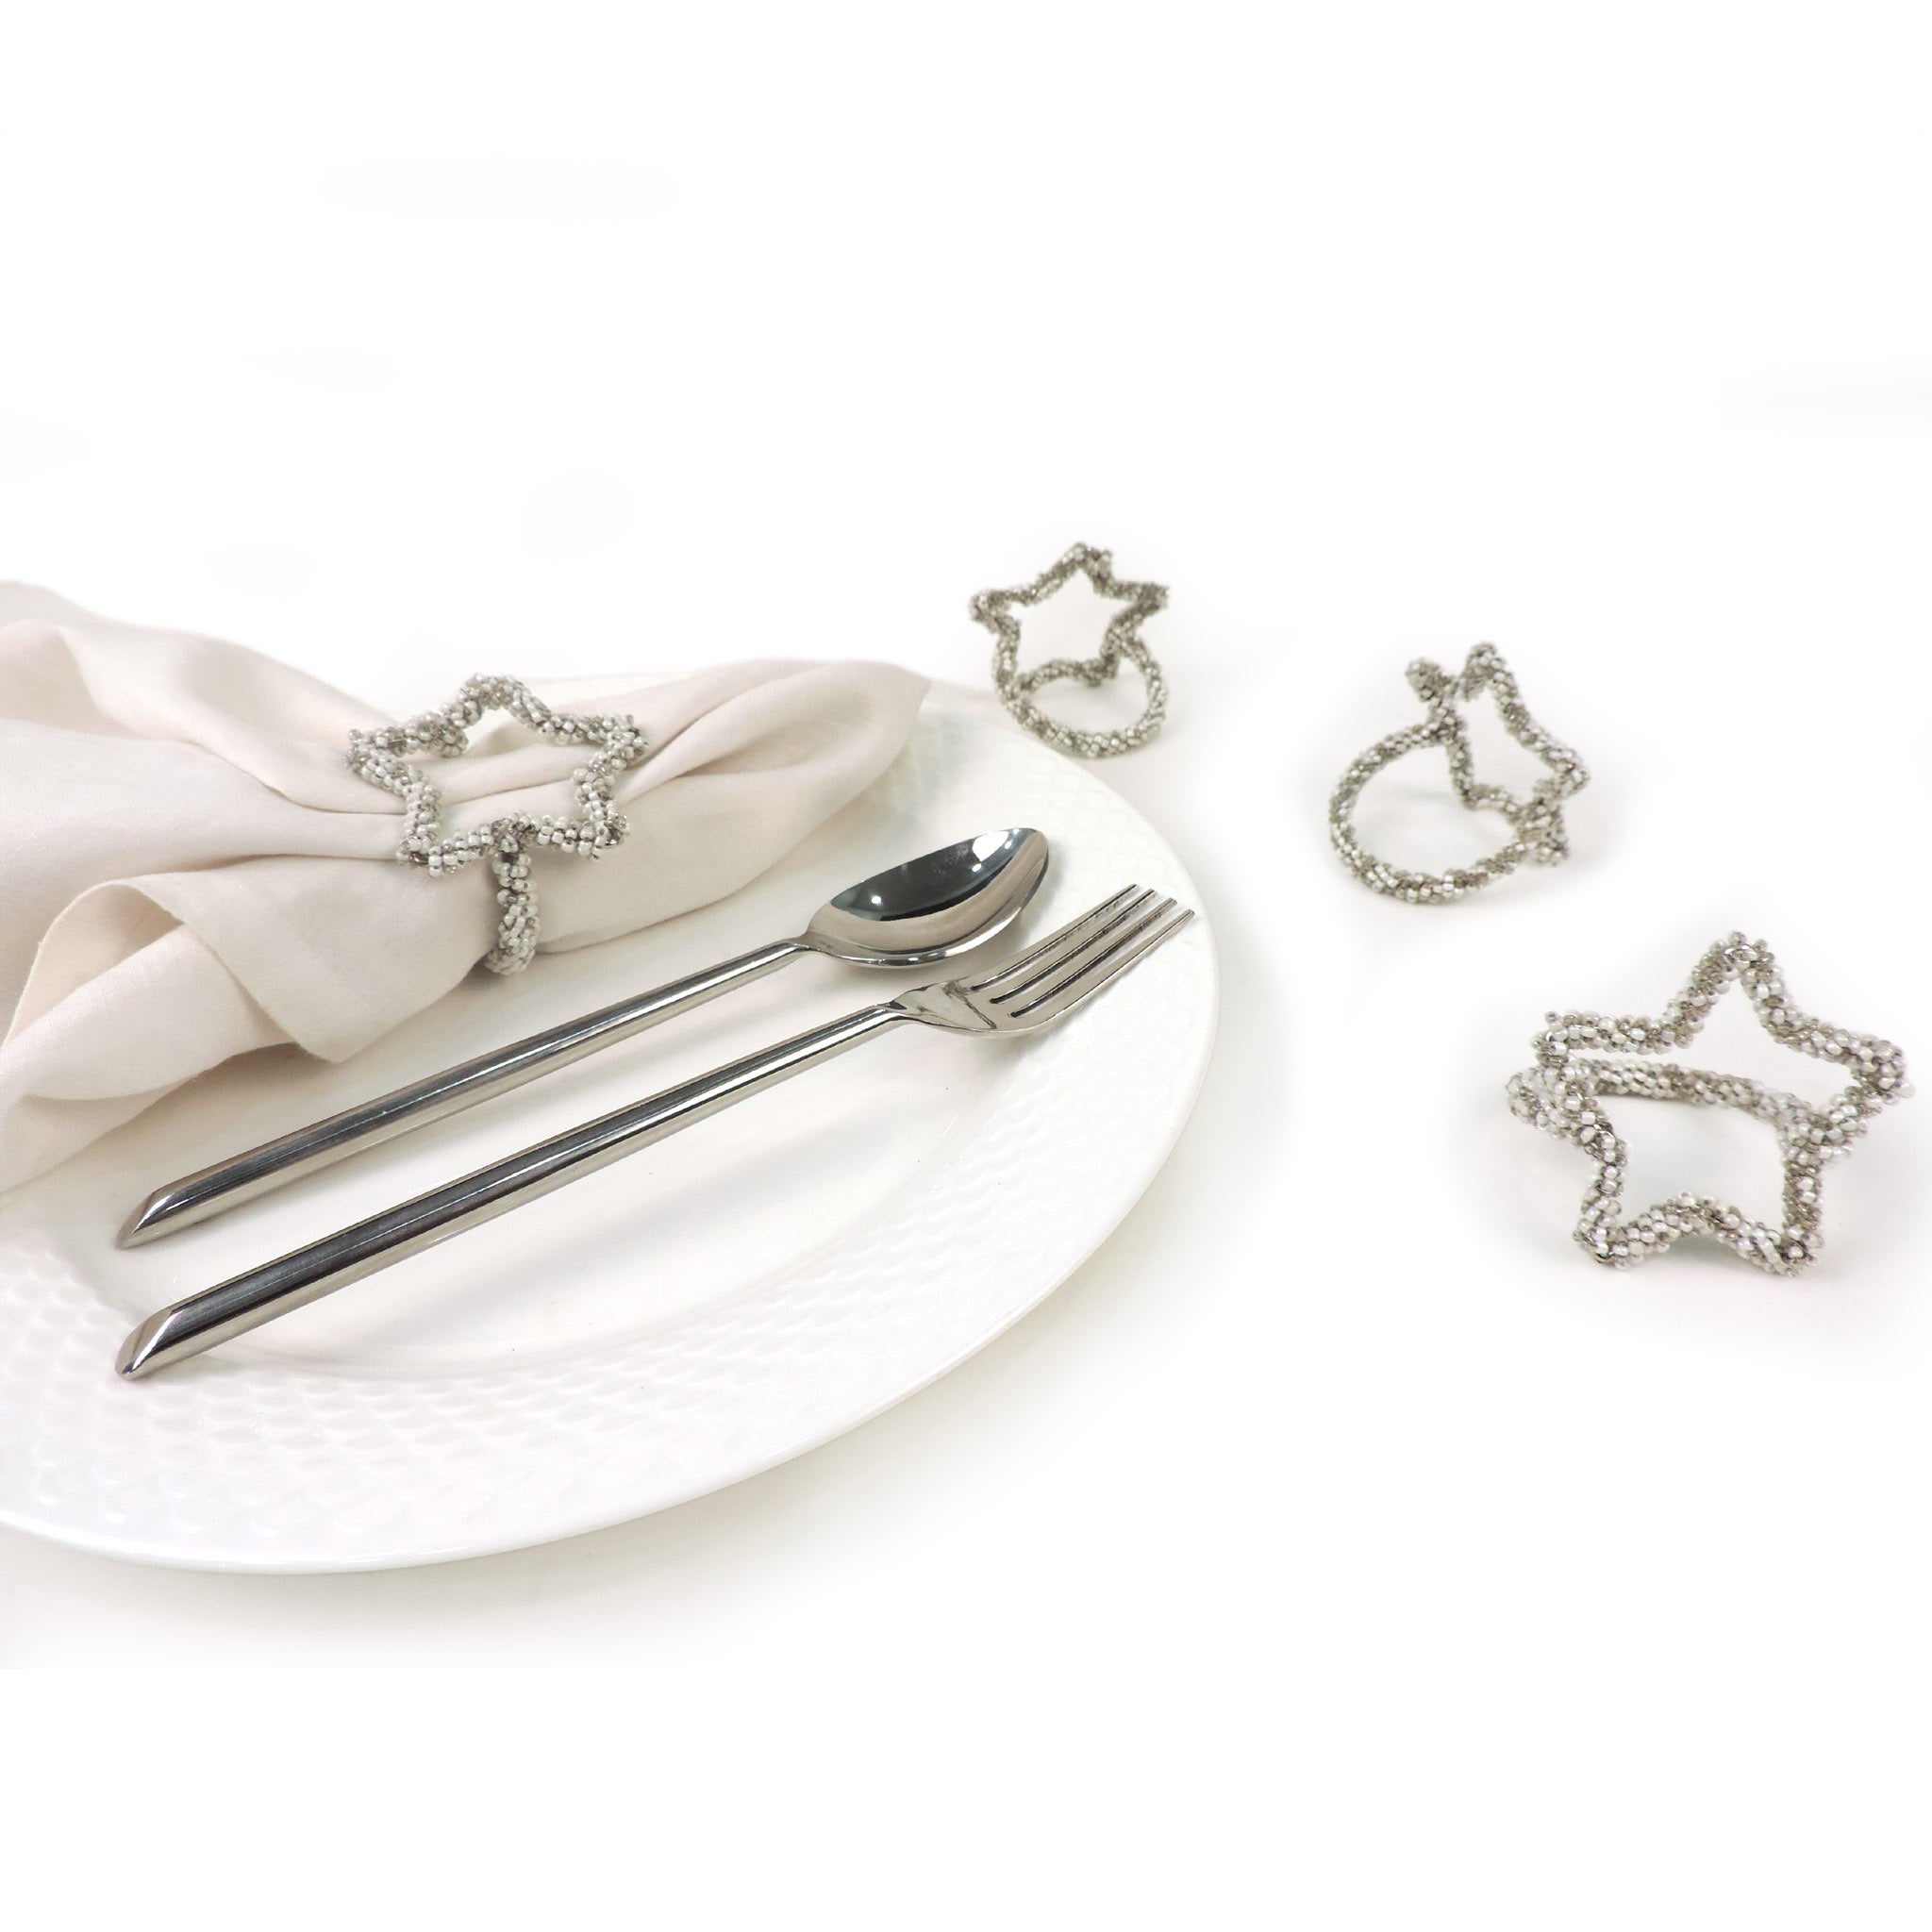 Star Attraction Napkin Ring in Cream & Silver, Set of 4